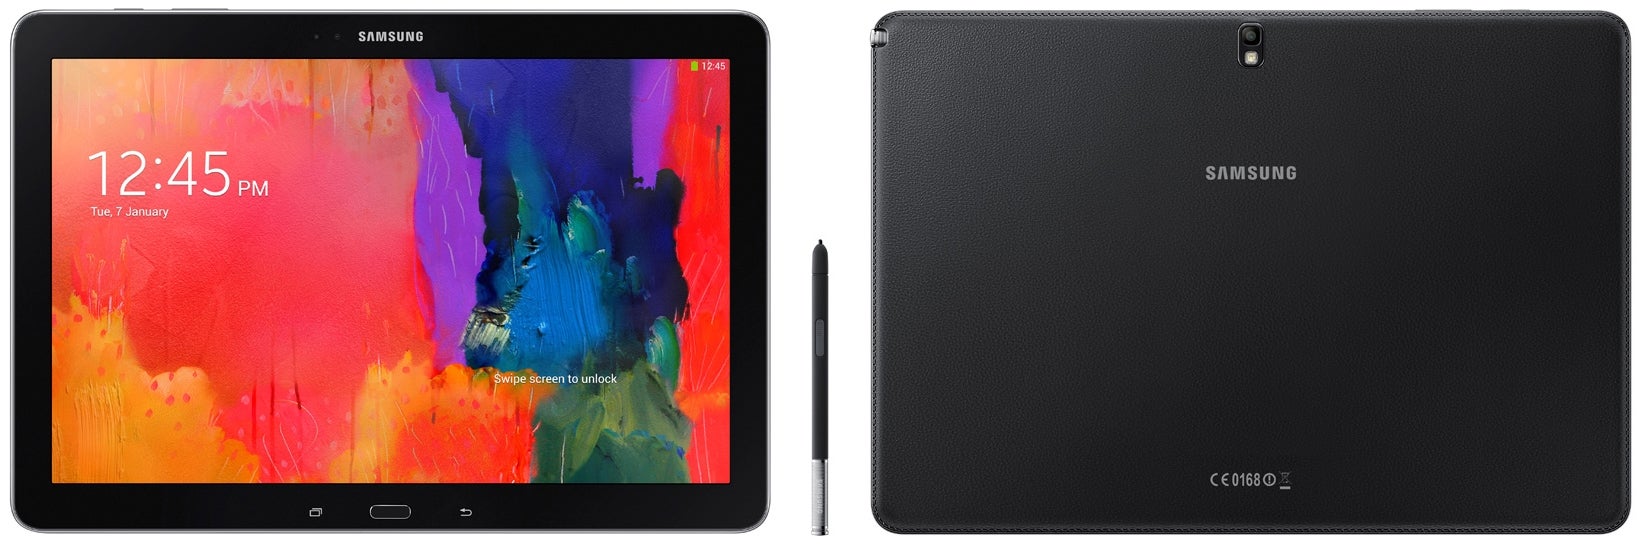 Samsung Galaxy NotePRO launching in the US on February 13?